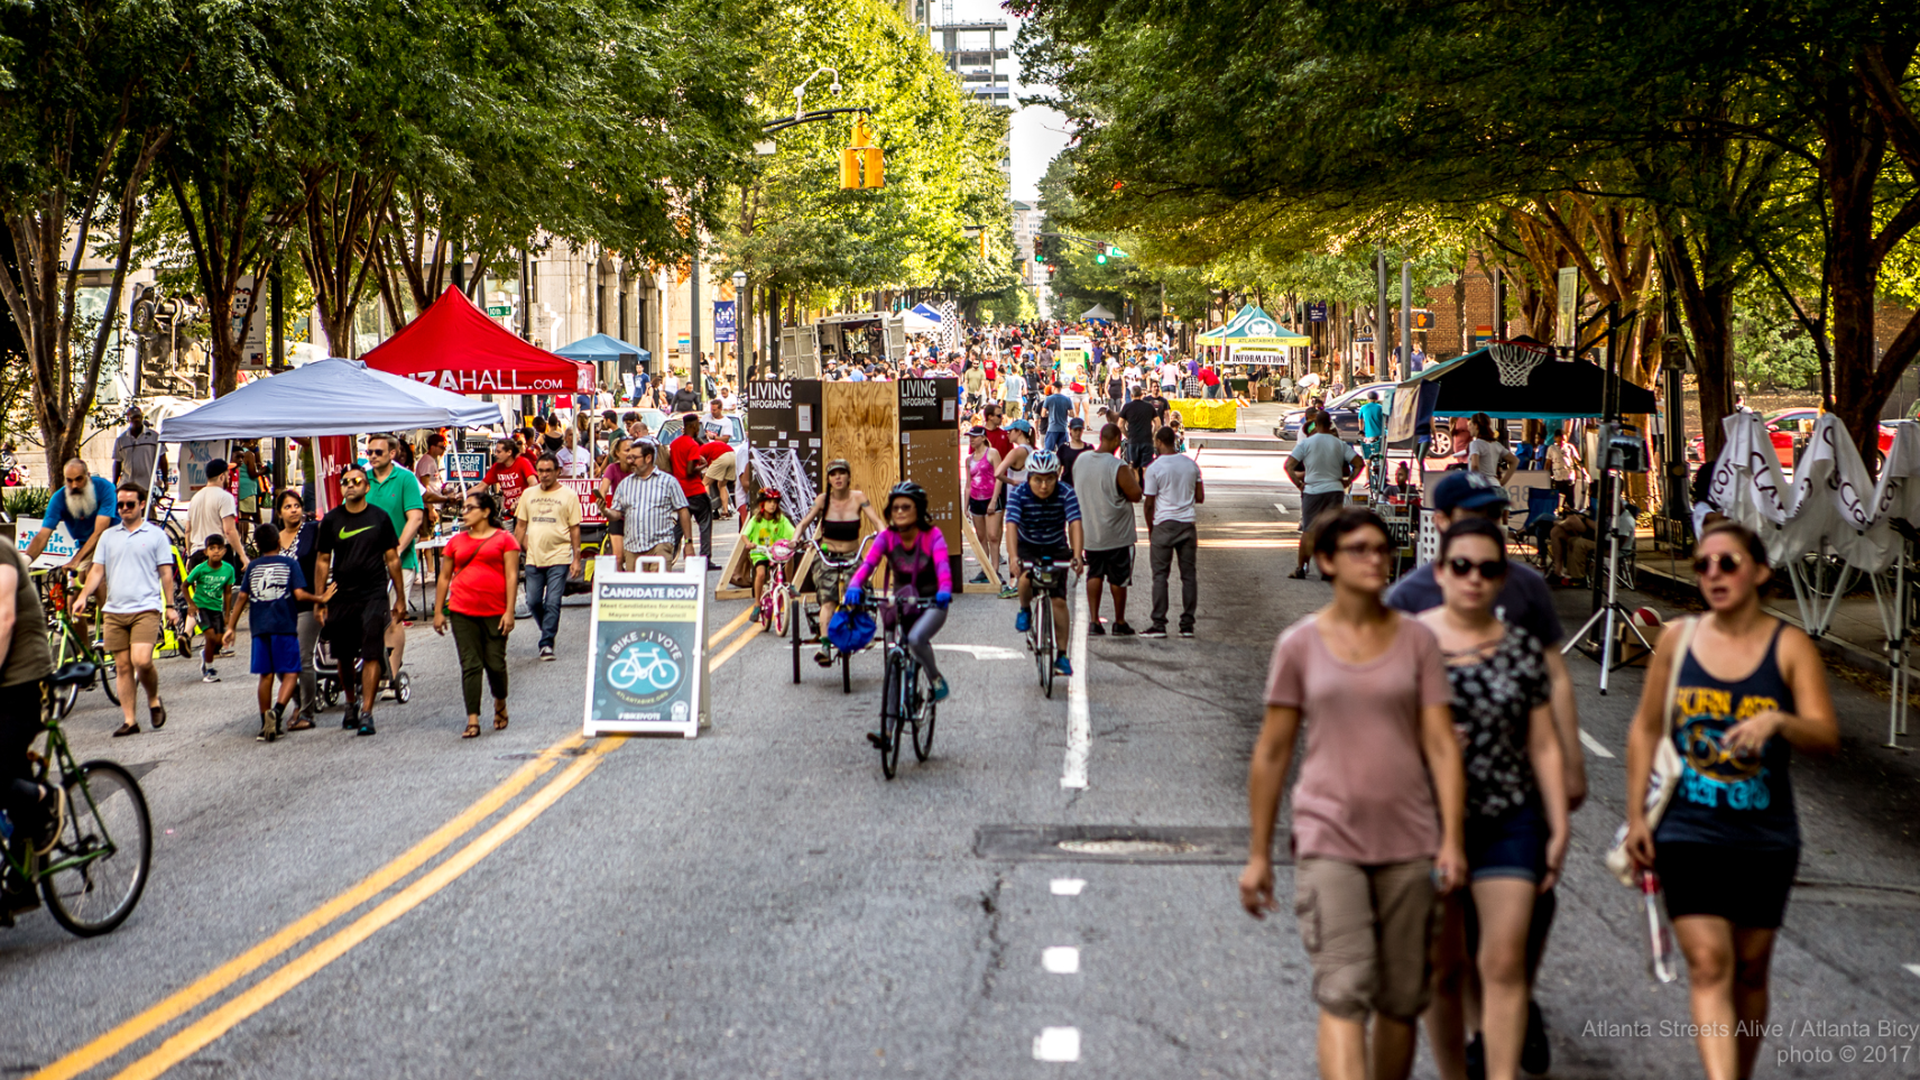 People walk and bike at a street festival shaded by trees and closed to cars in a dense urban setting